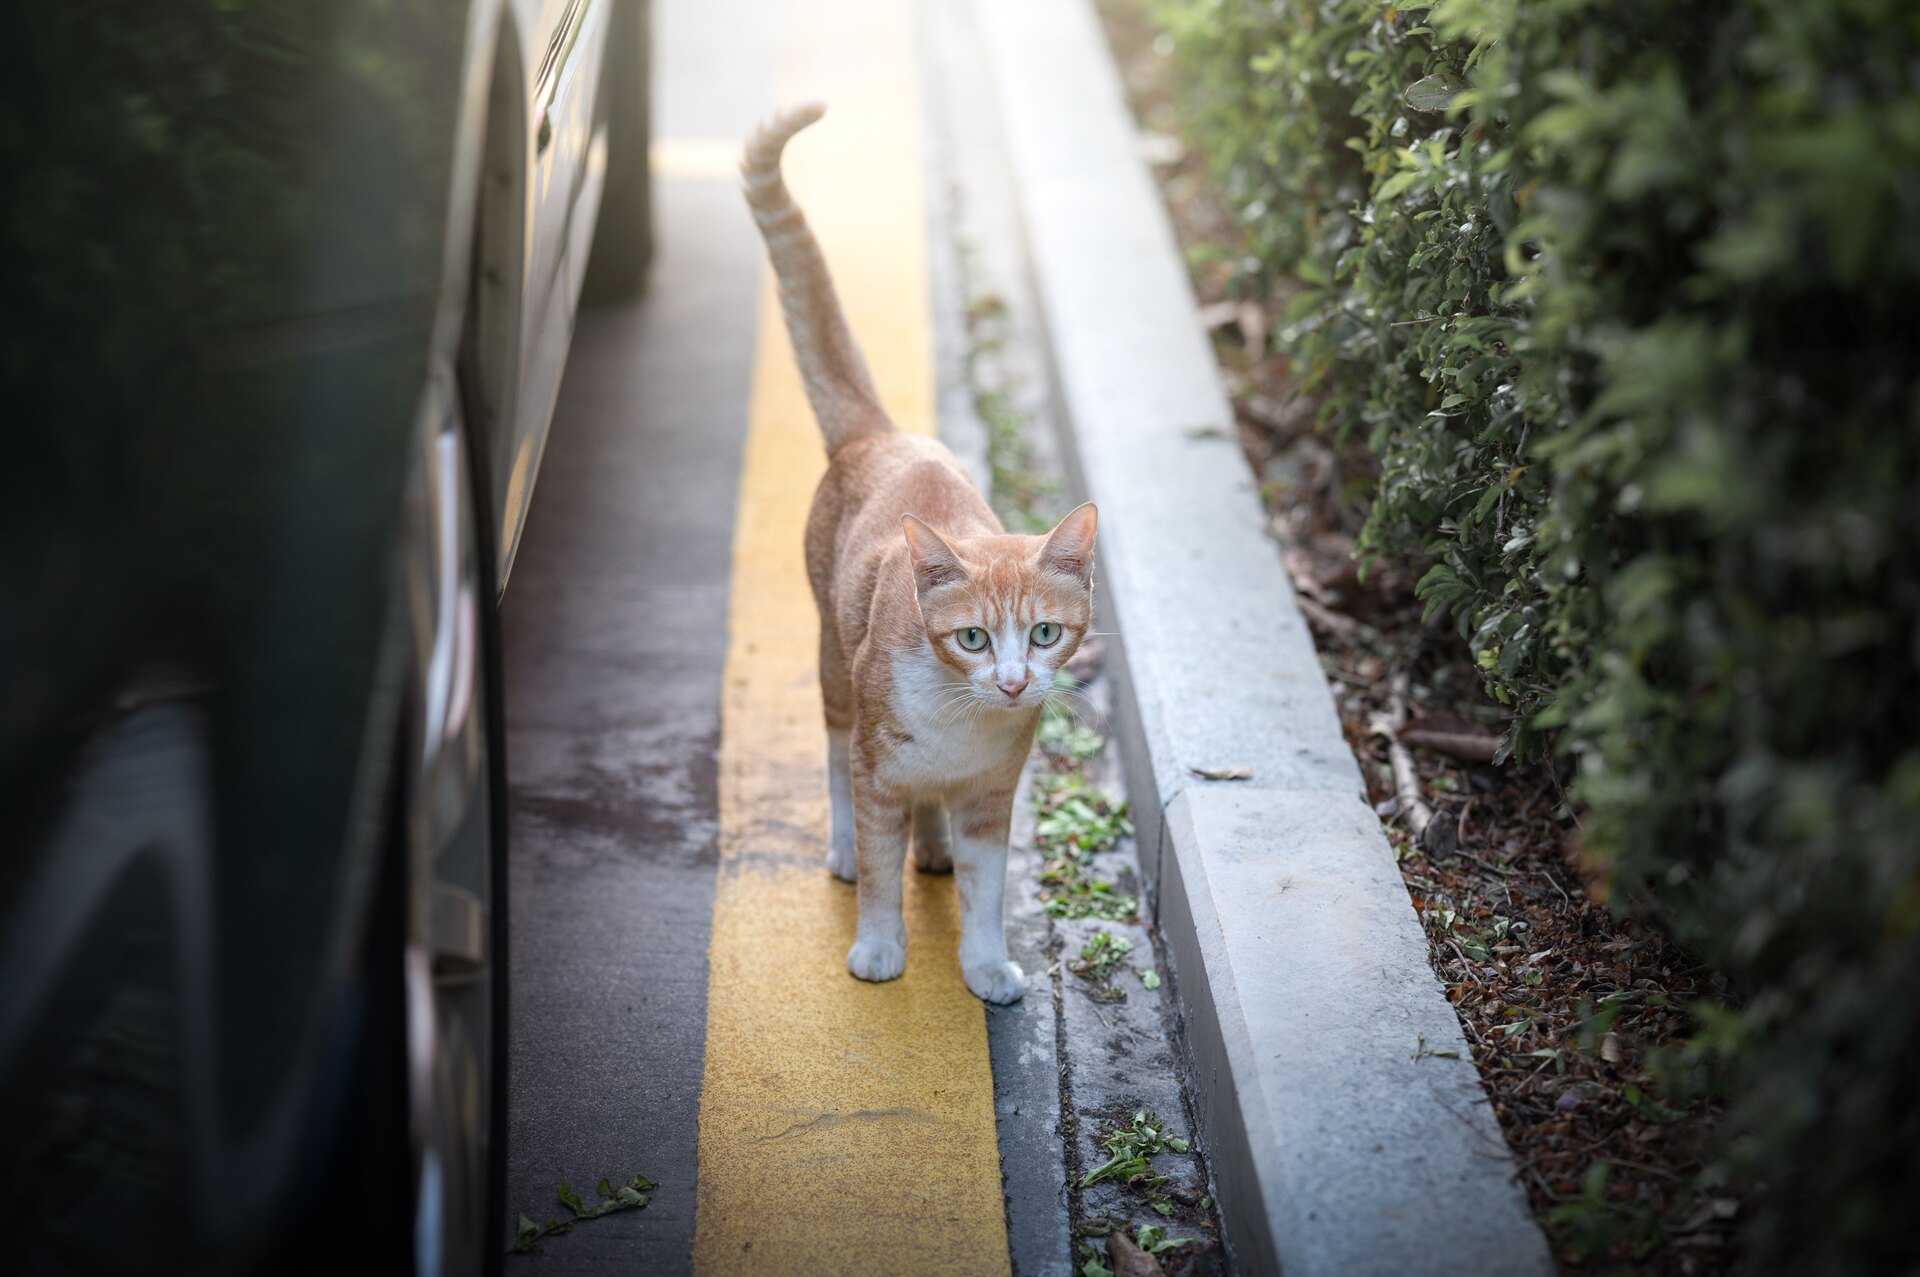 A cat standing in a street by a car